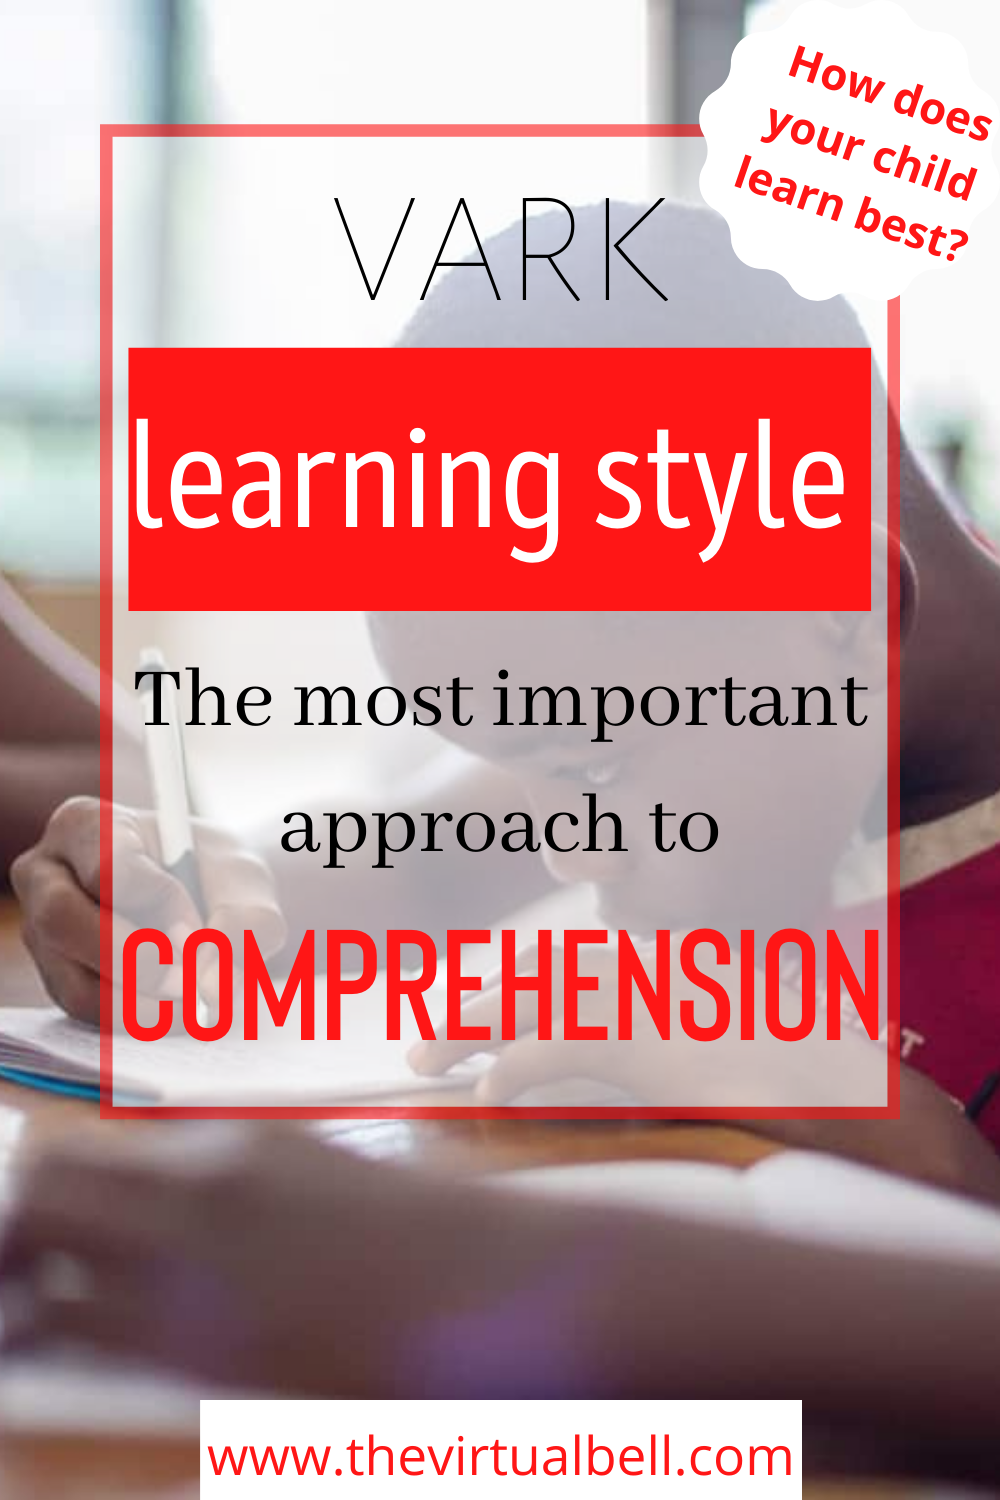 VARK learning style: How does your child learn best?